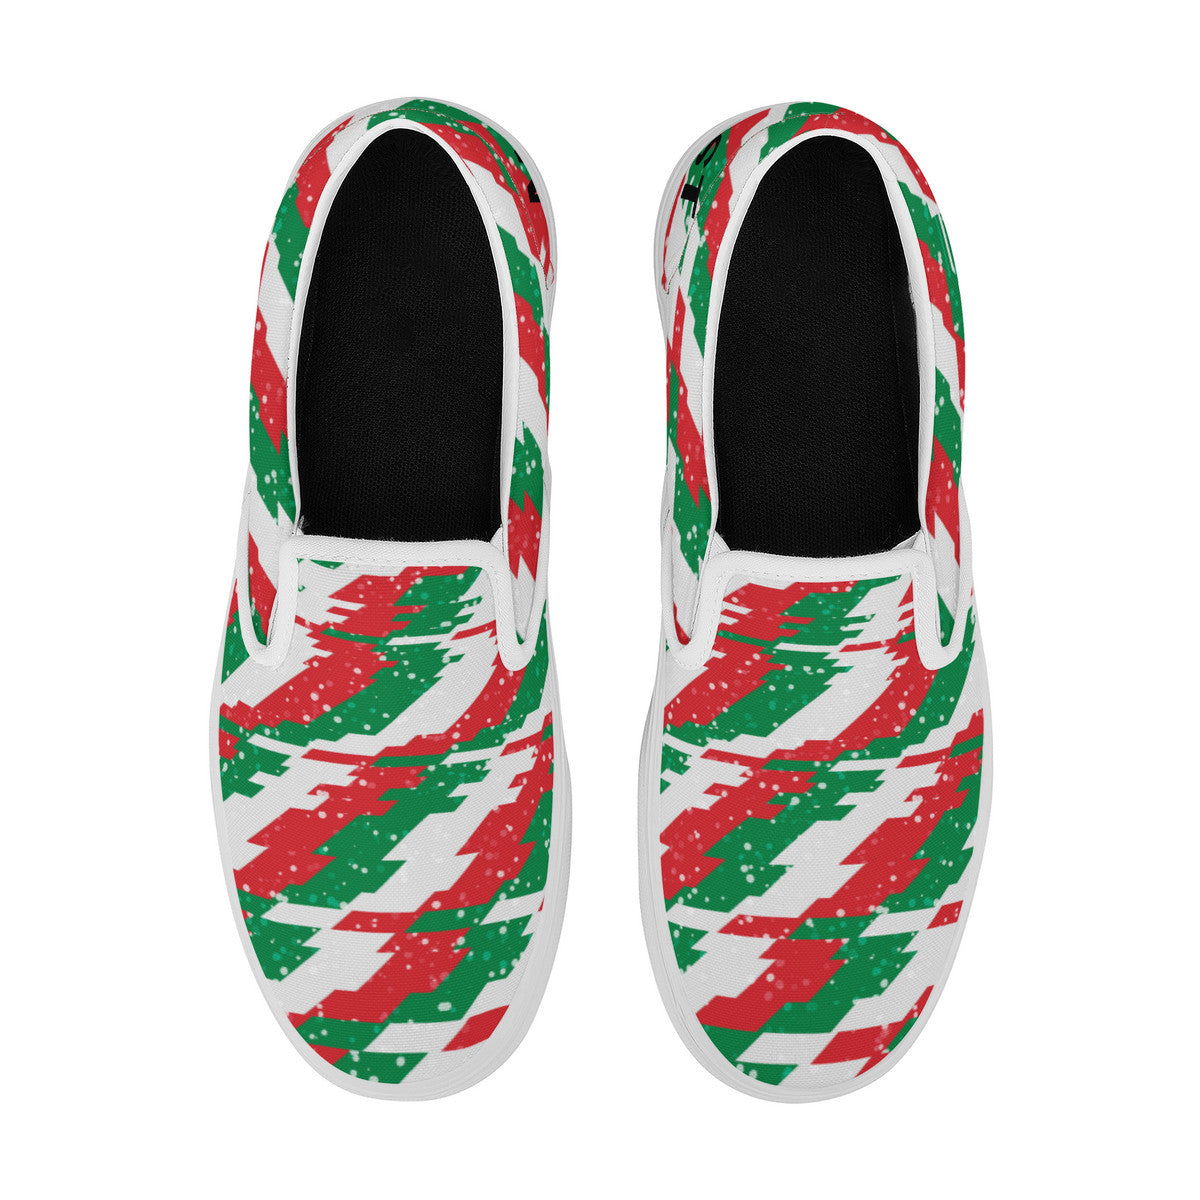 Mass Cast Winter Edition Slip On Shoes